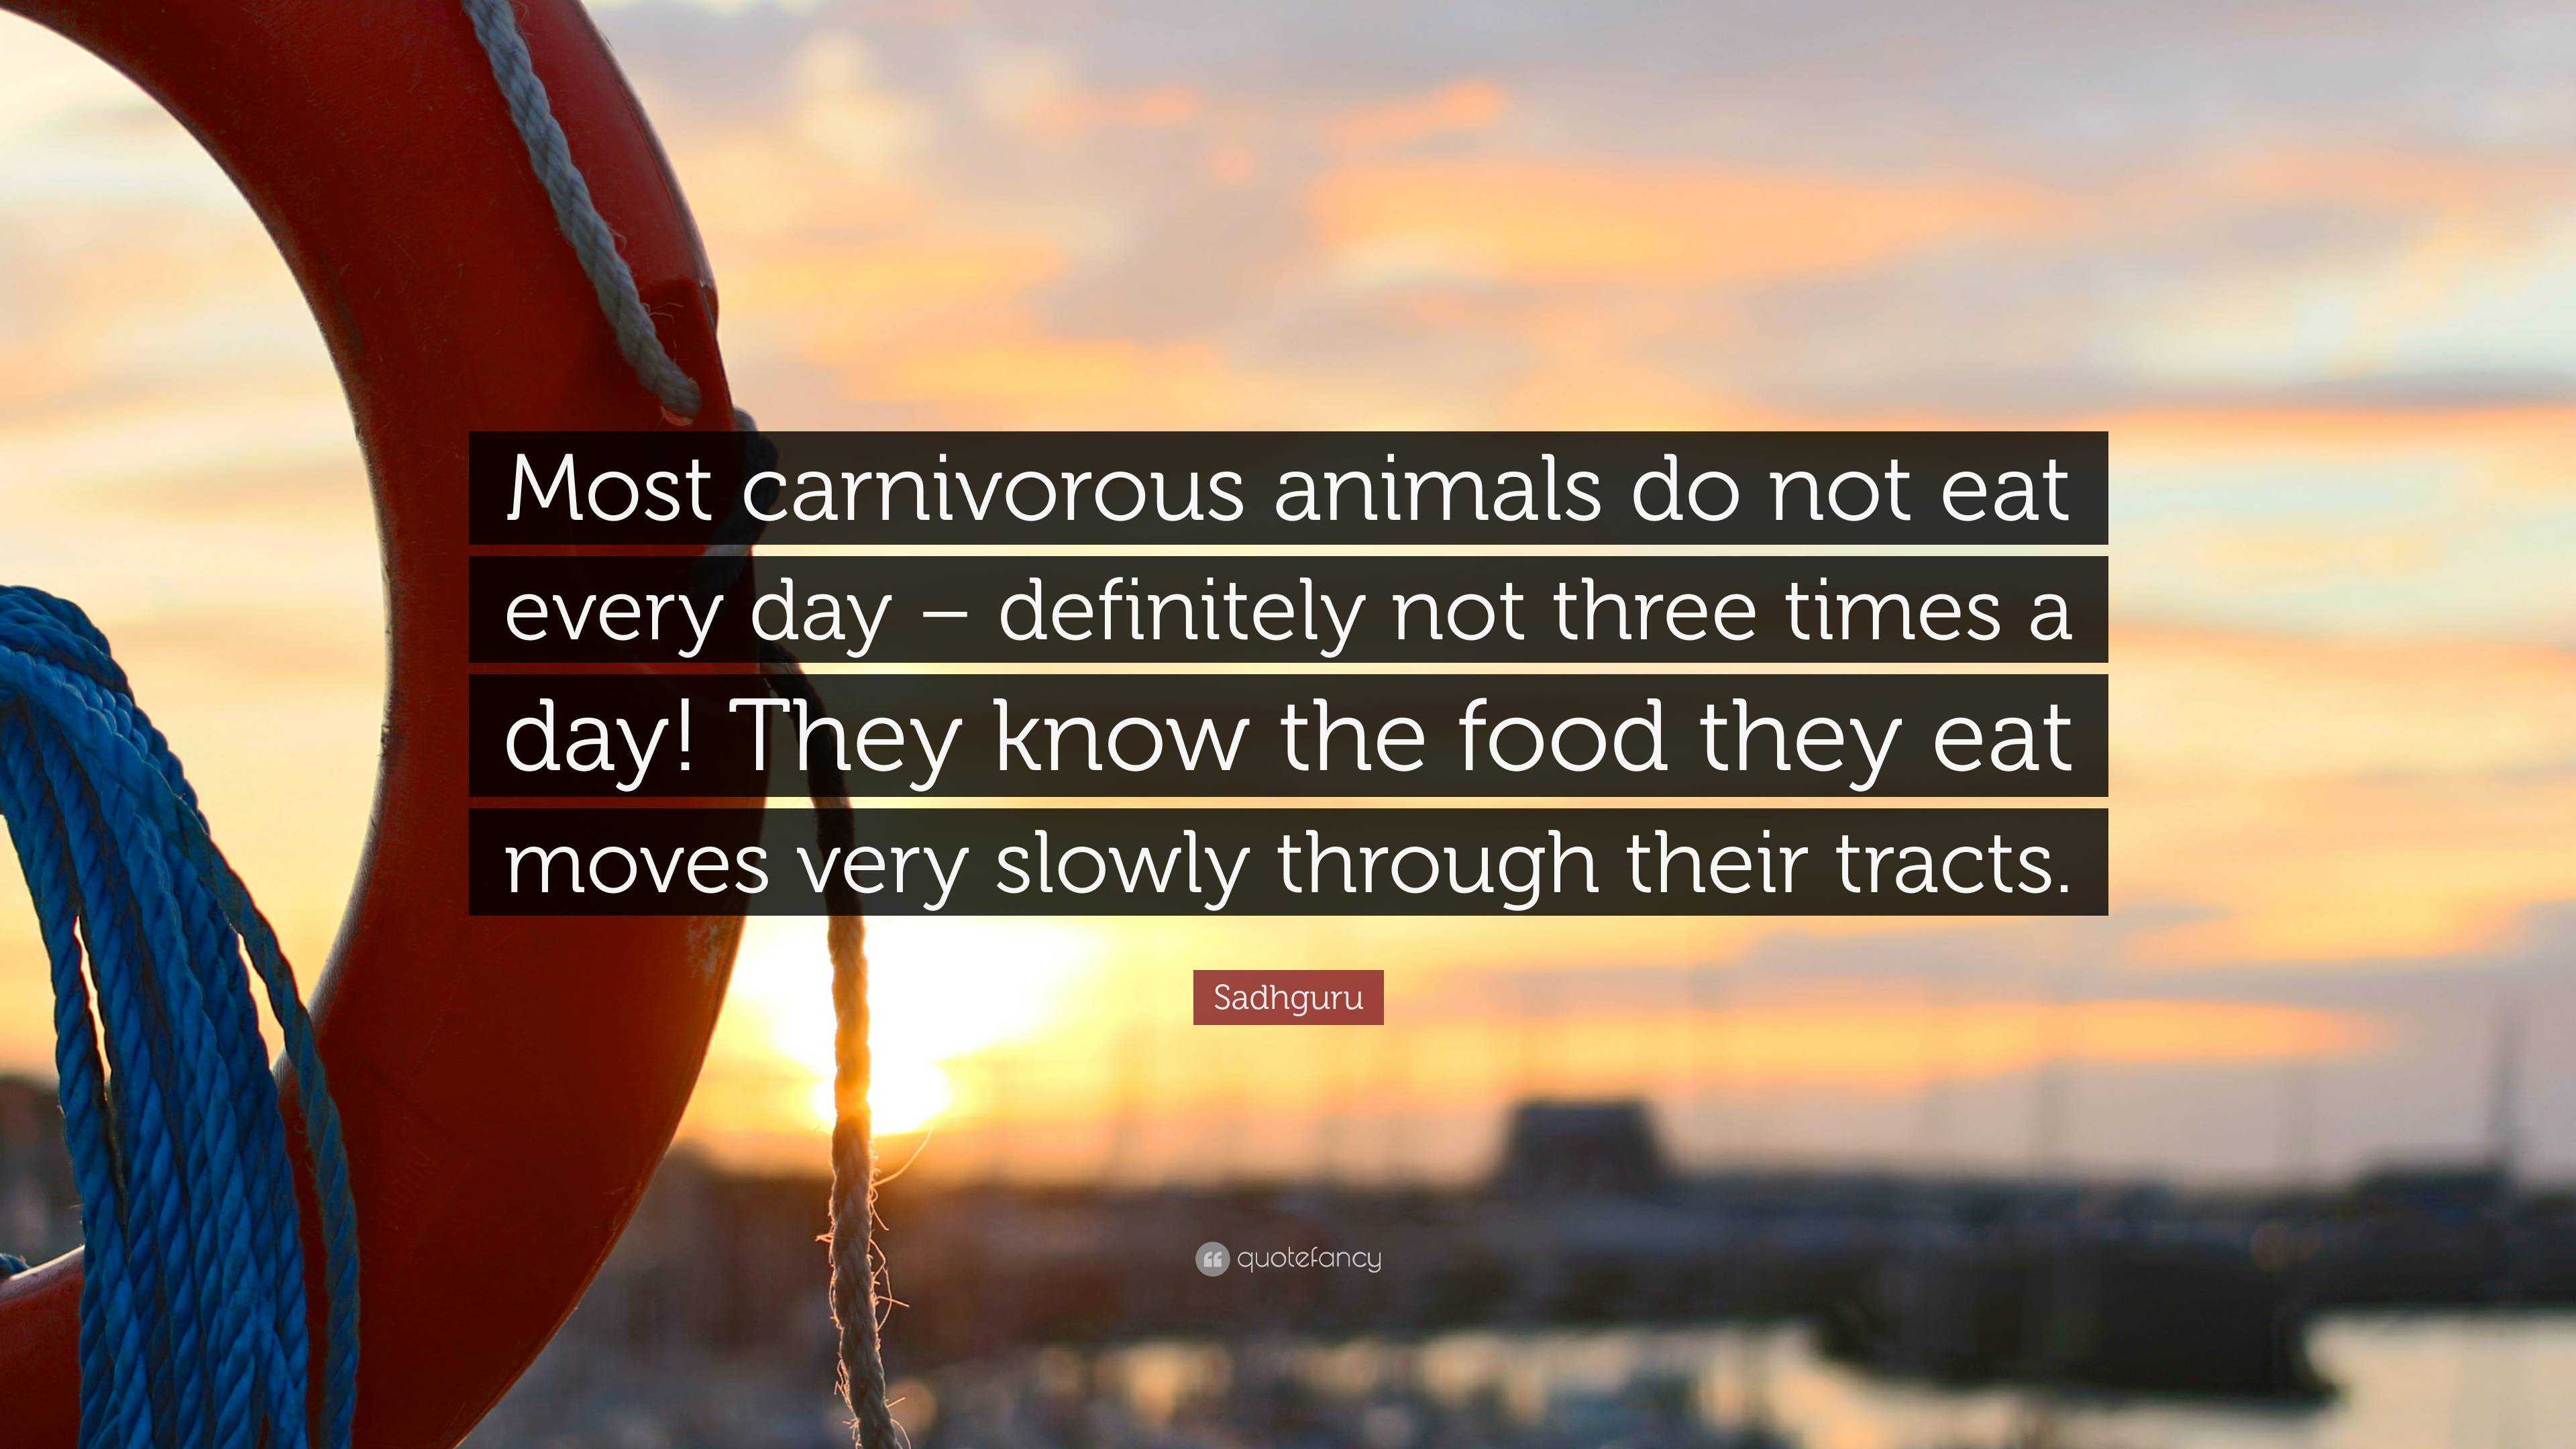 Sadhguru Quote: “Most carnivorous animals do not eat every day – definitely  not three times a day! They know the food they eat moves very...”